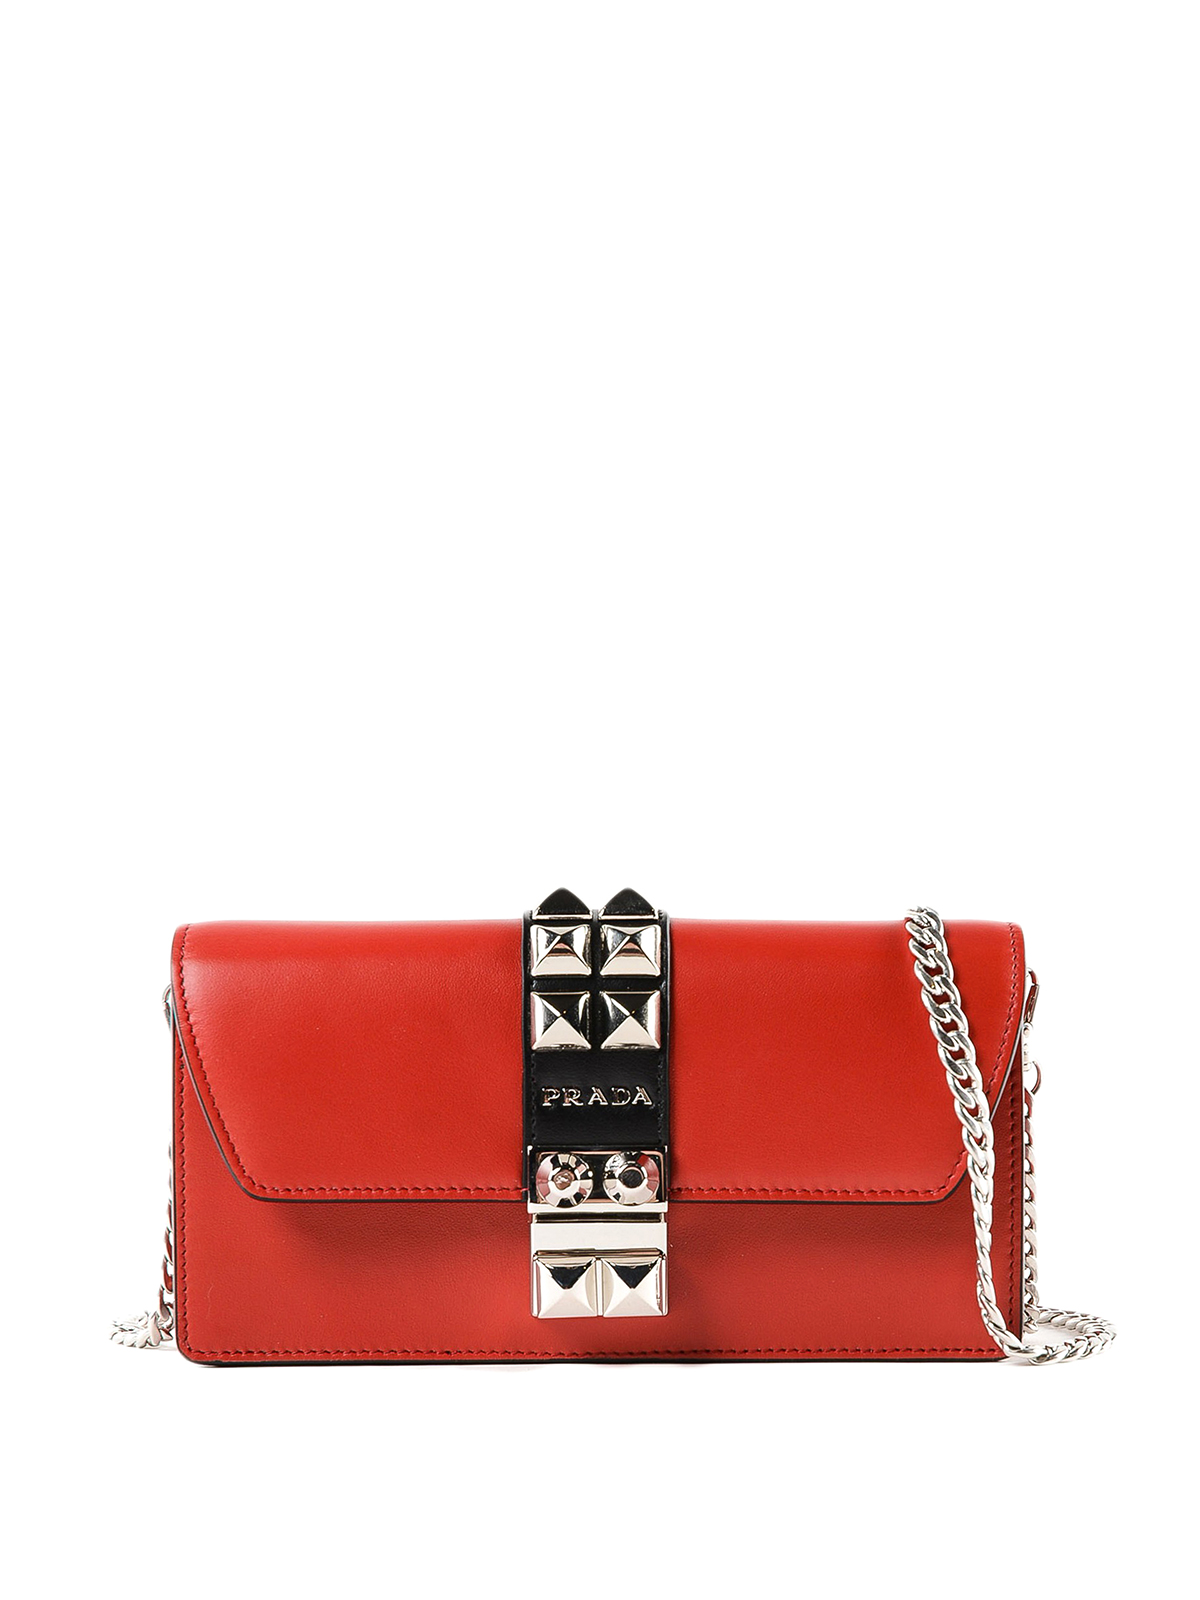 Studded leather clutch with chain strap 